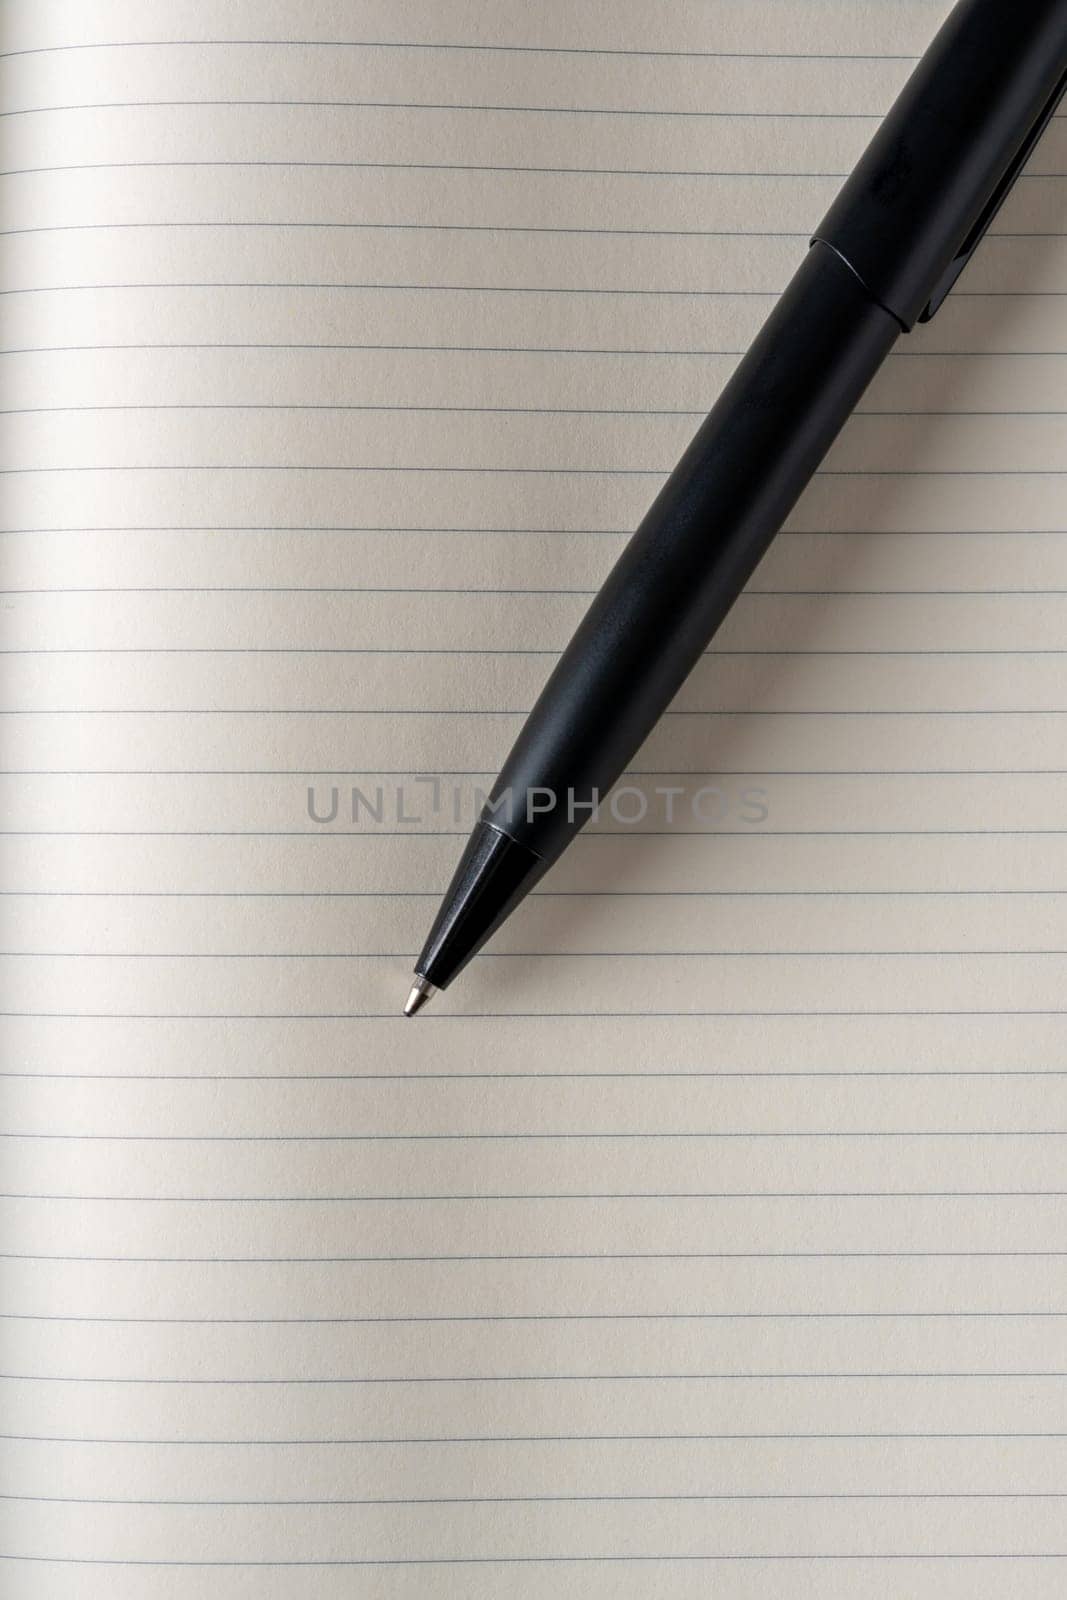 Top view of black ballpoint pen on lined note paper by Sonat